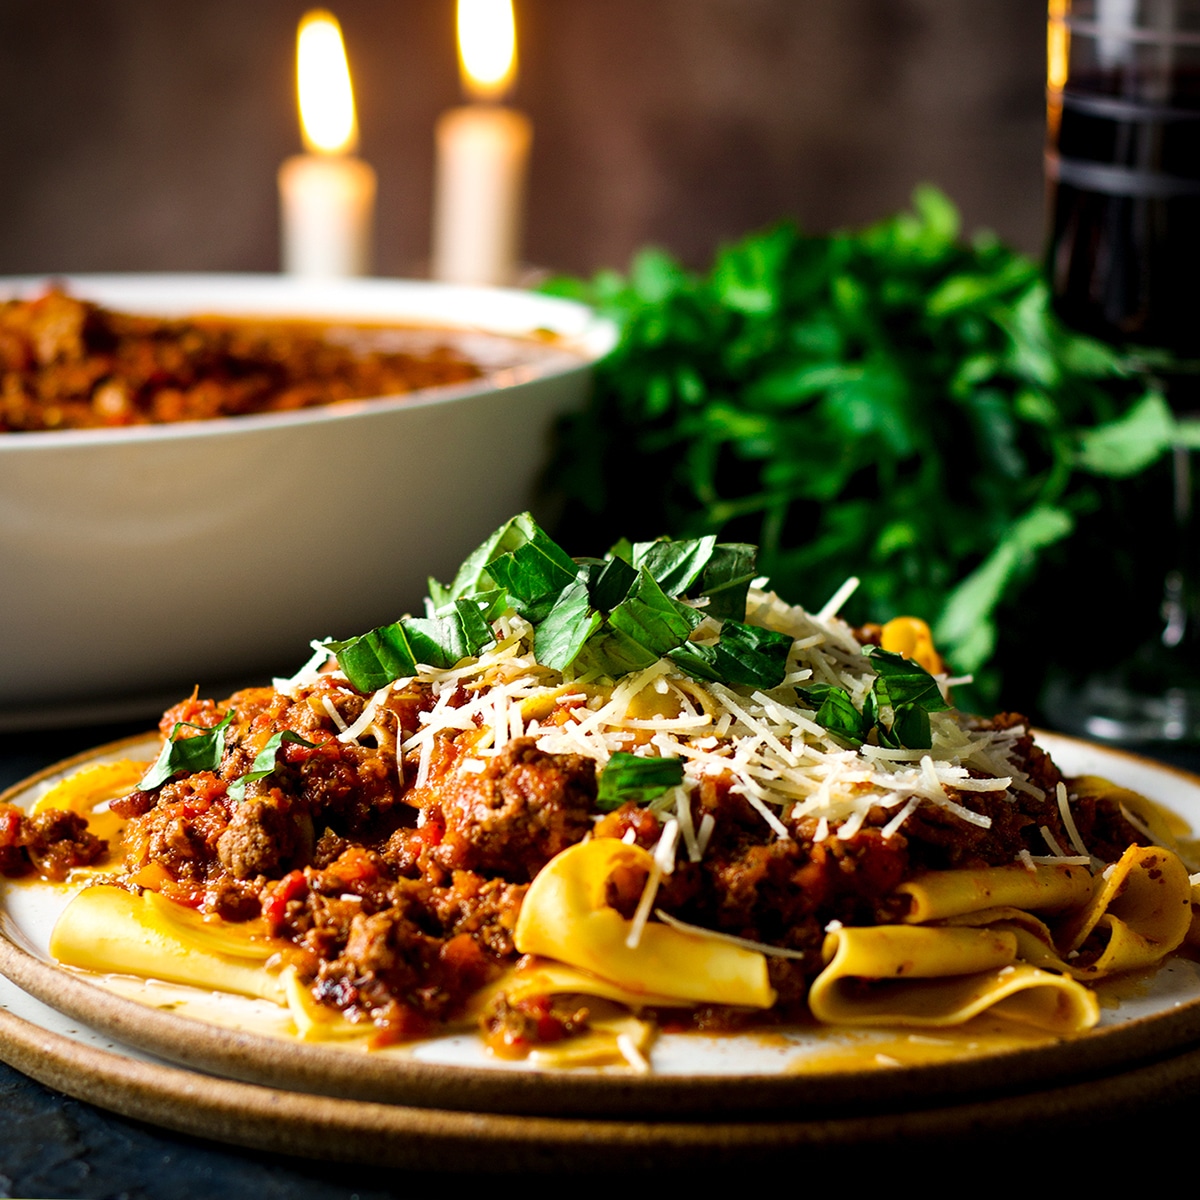 A plate of pasta smothered in homemade bolognese sauce.